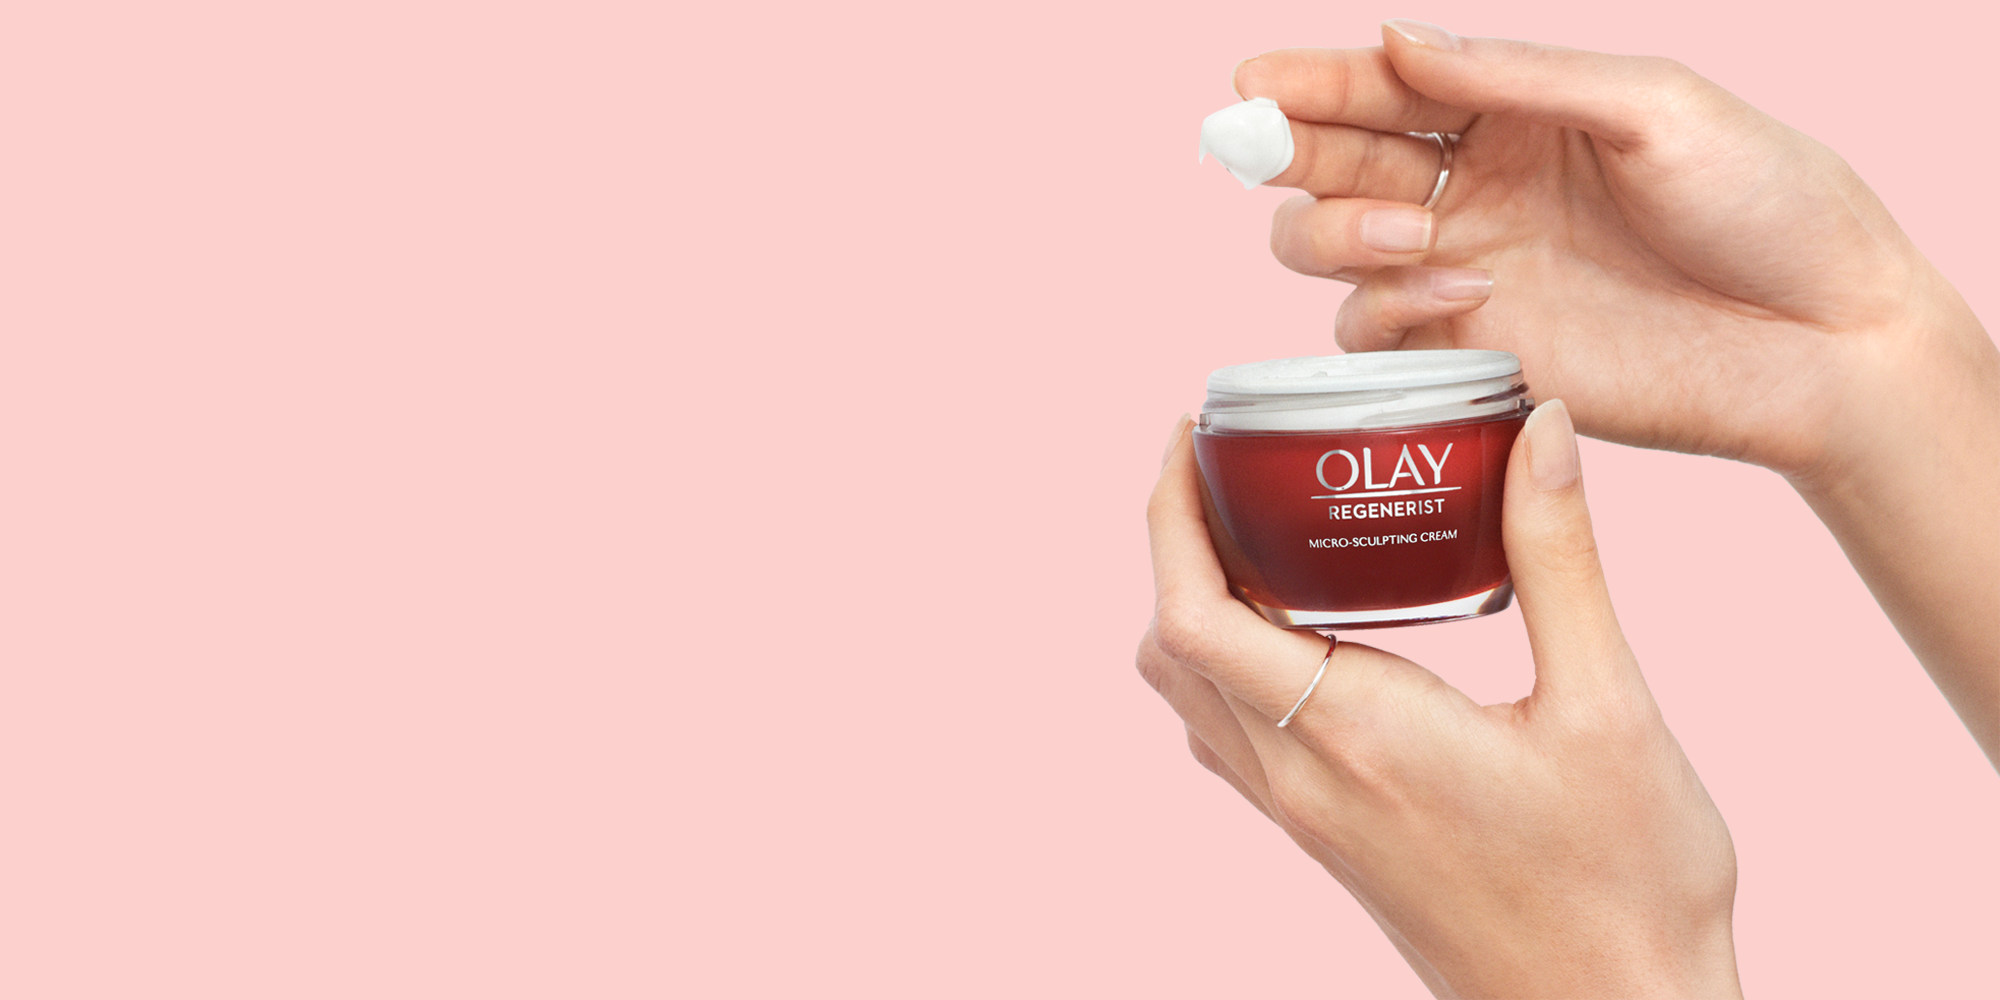 15 Best Face Moisturizers of 2020